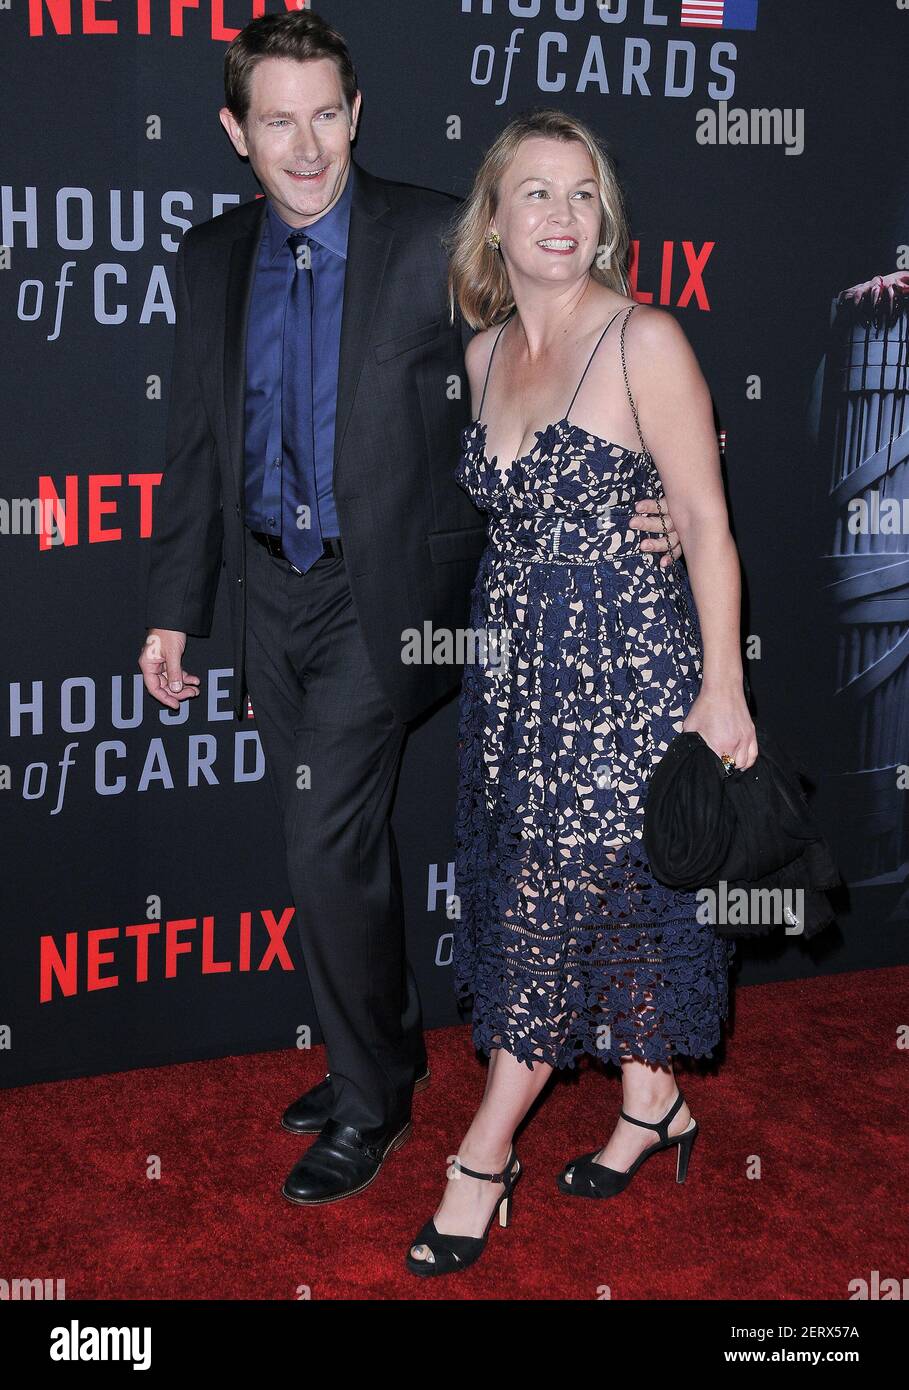 L-R) Derek Cecil and Costume Designer Melissa Bruning at Netflix's "House  Of Cards" Season 6 Los Angeles Premiere held at the DGA Theater in Los  Angeles, CA on Monday, ?October 22, 2018. (